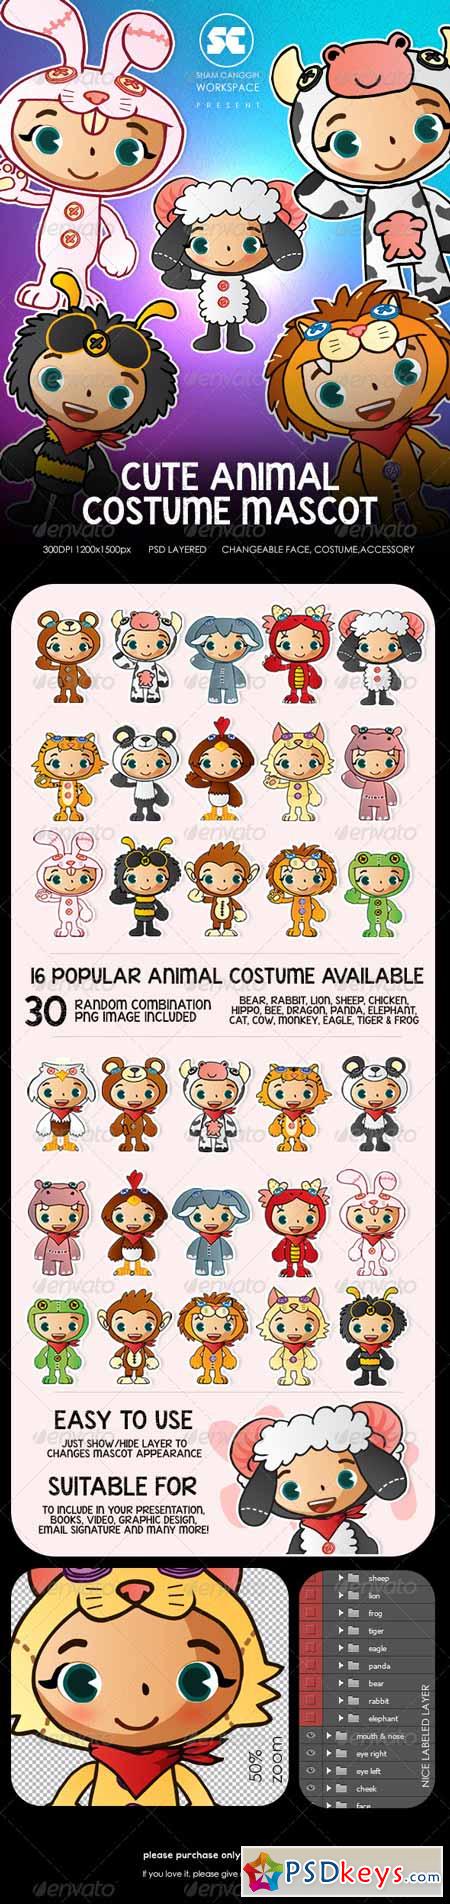 People With Cute Animal Costume Mascot 5198435